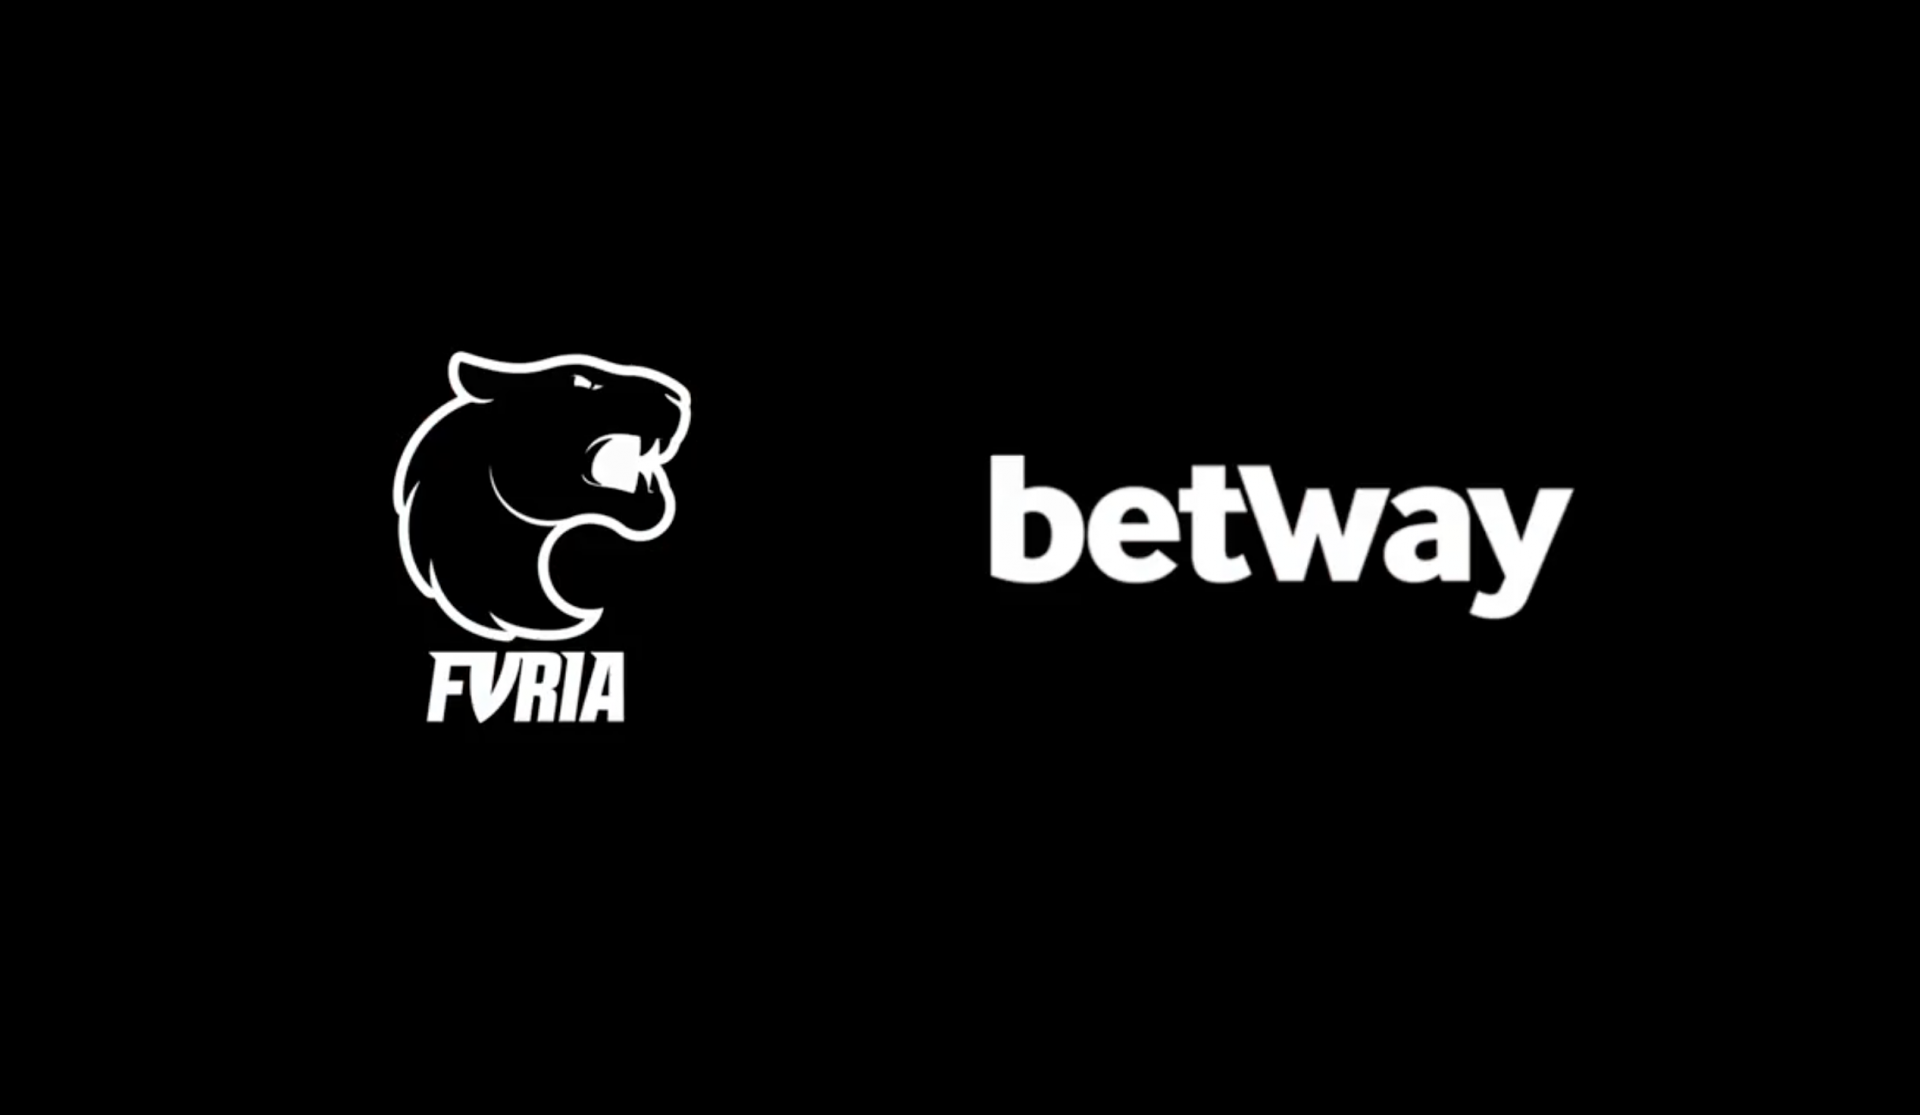 Betway partners with Furia